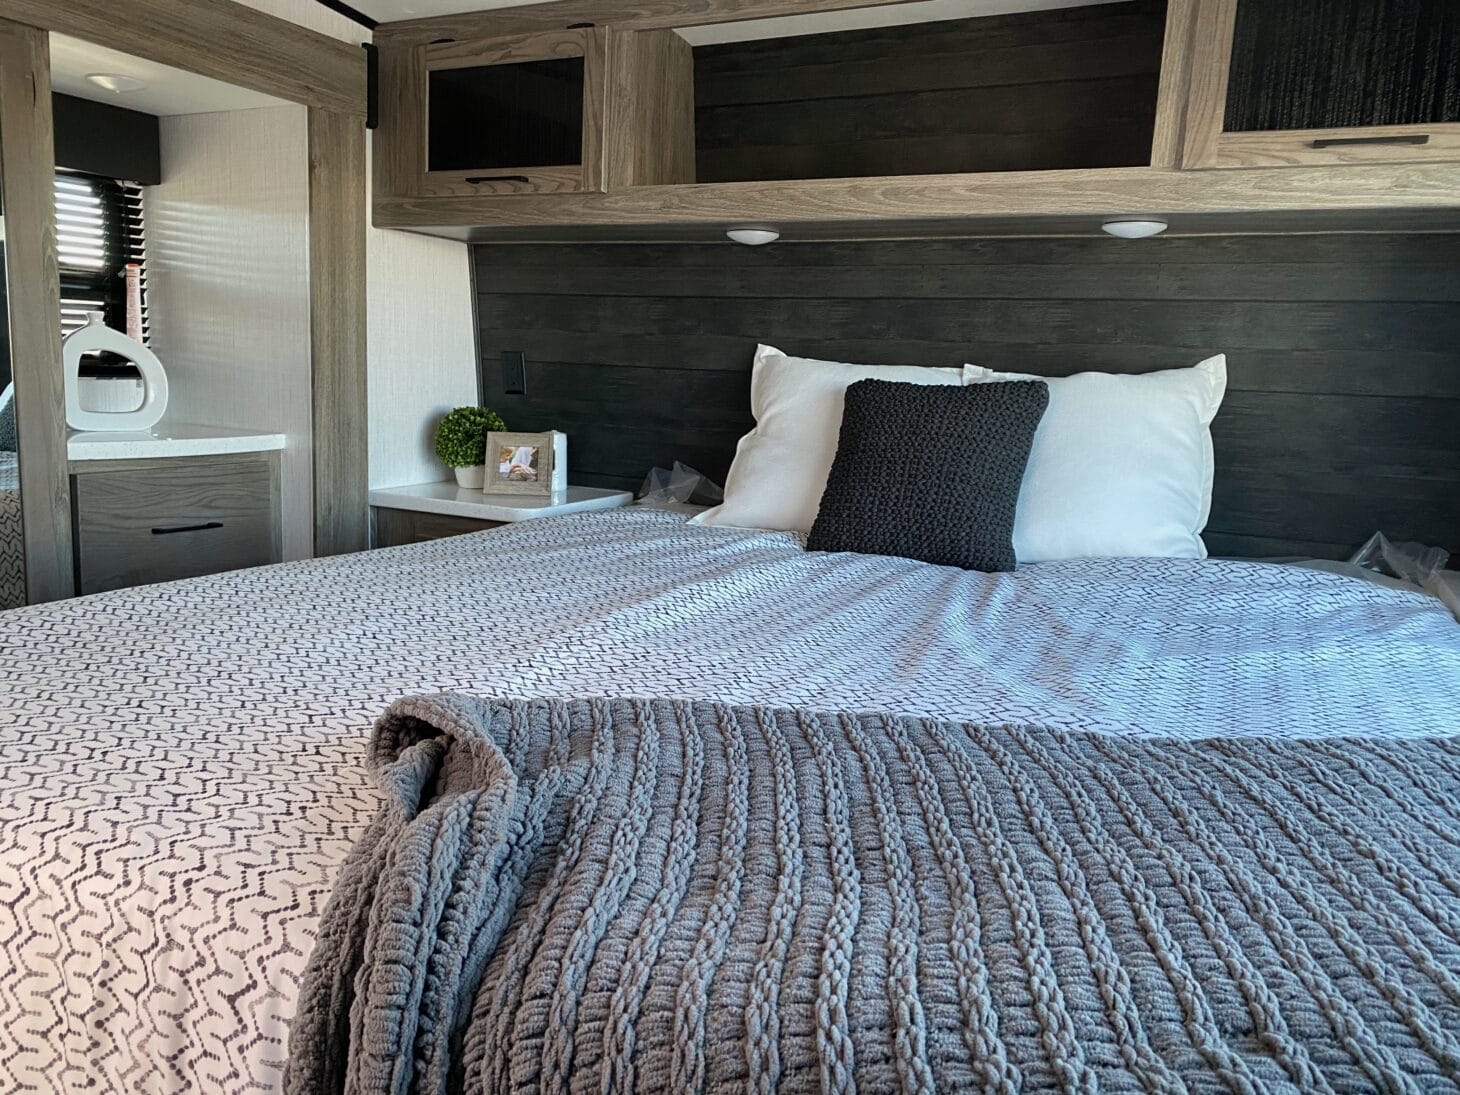 Bedroom in an RV with storage space above the bed